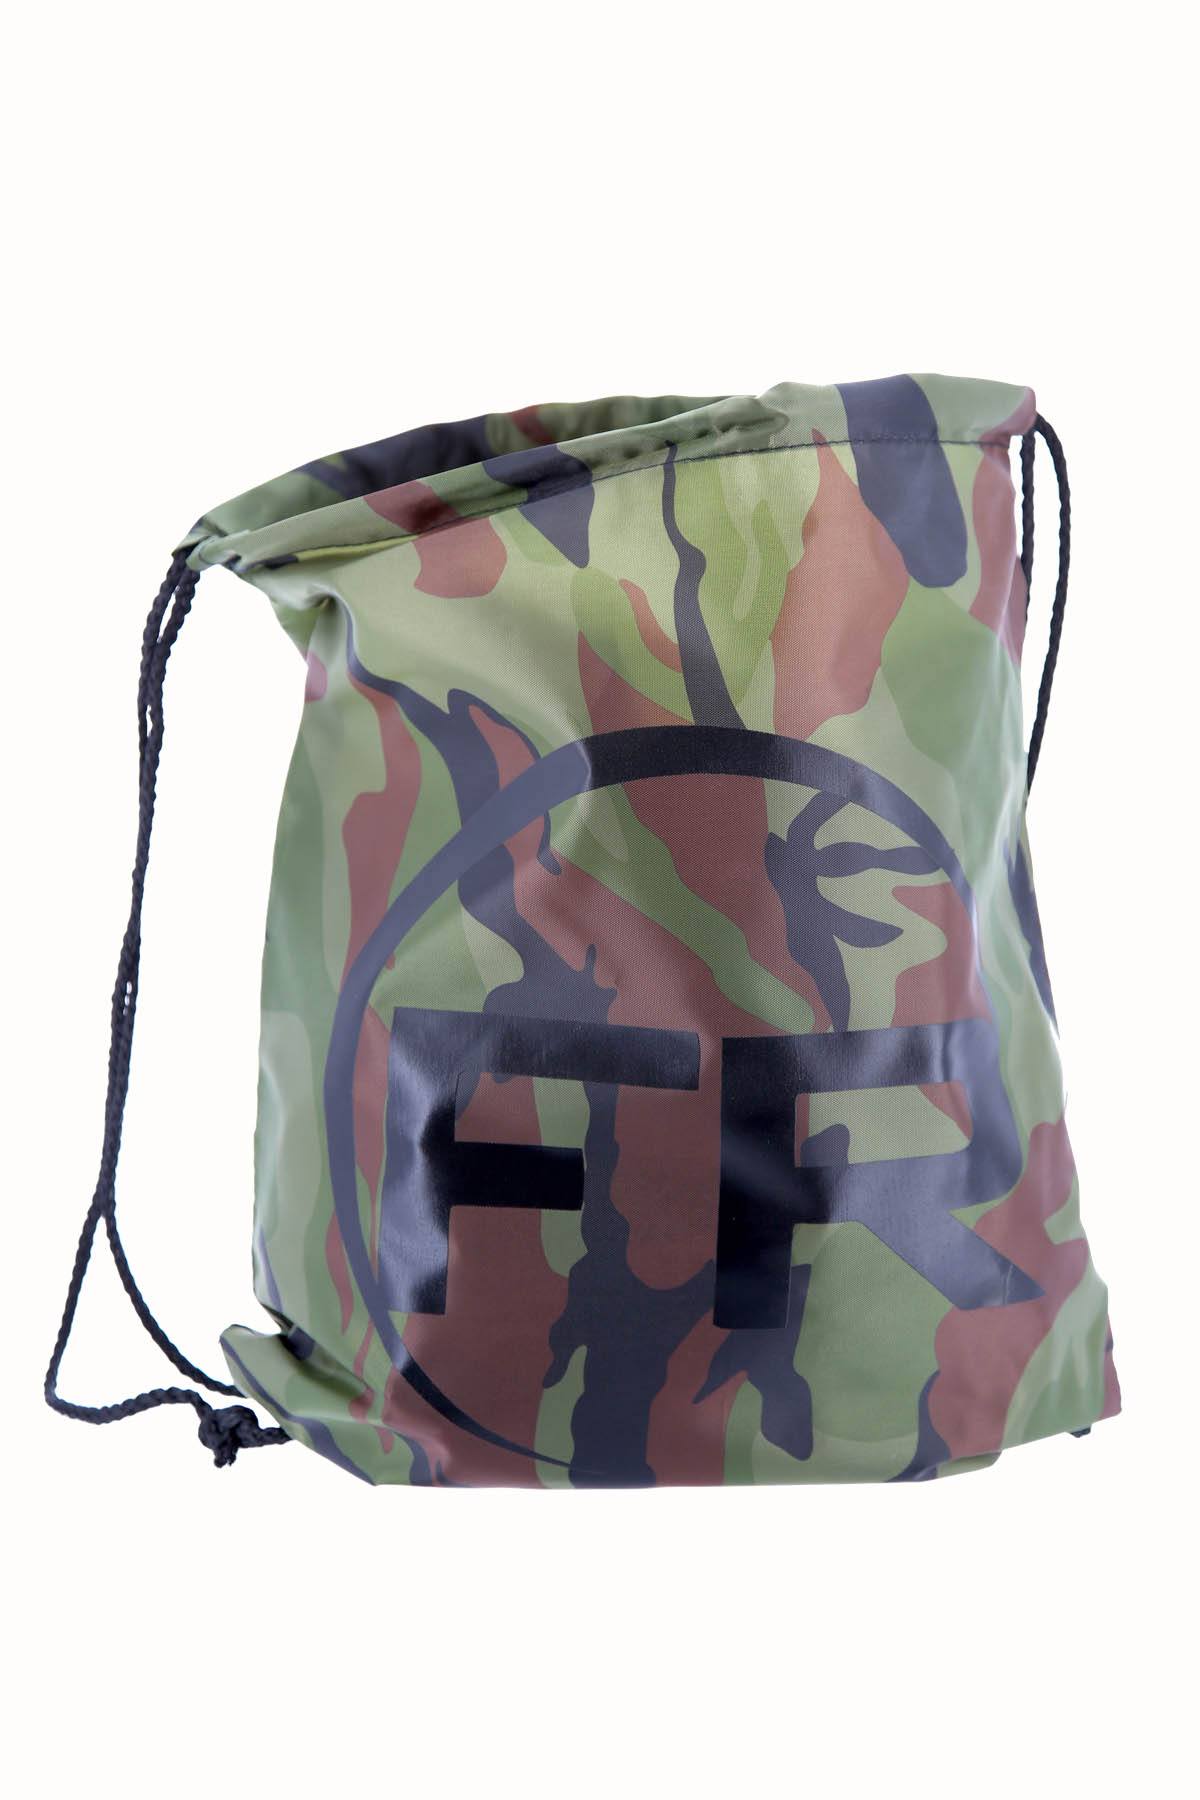 Freedom Reigns Green-Camo Backpack Bag